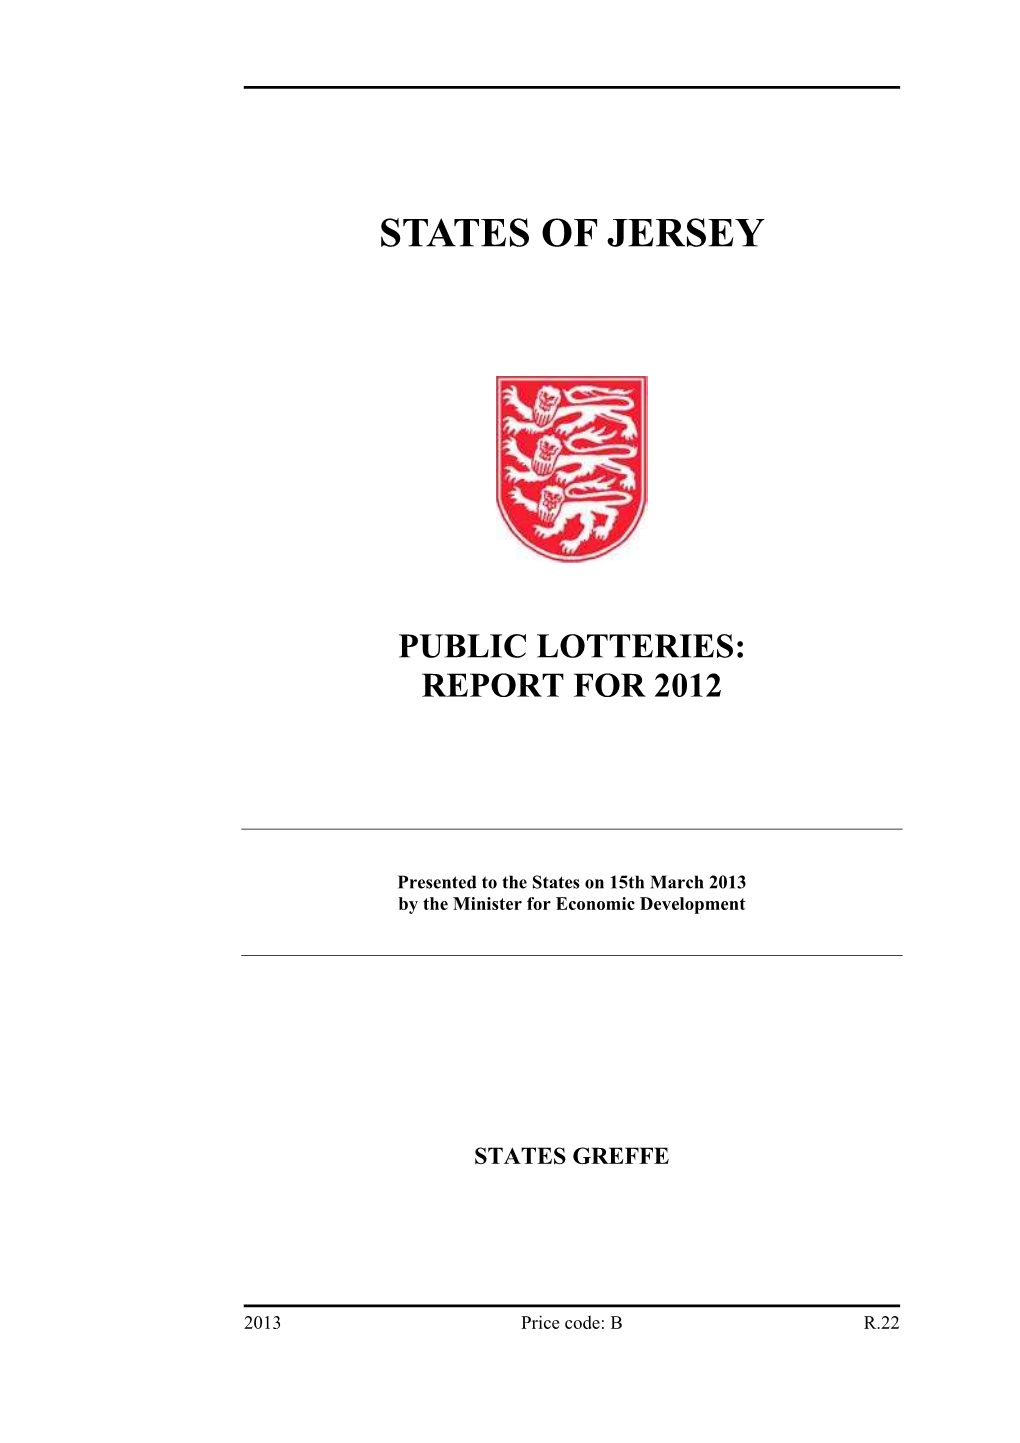 Public Lotteries: Report for 2012